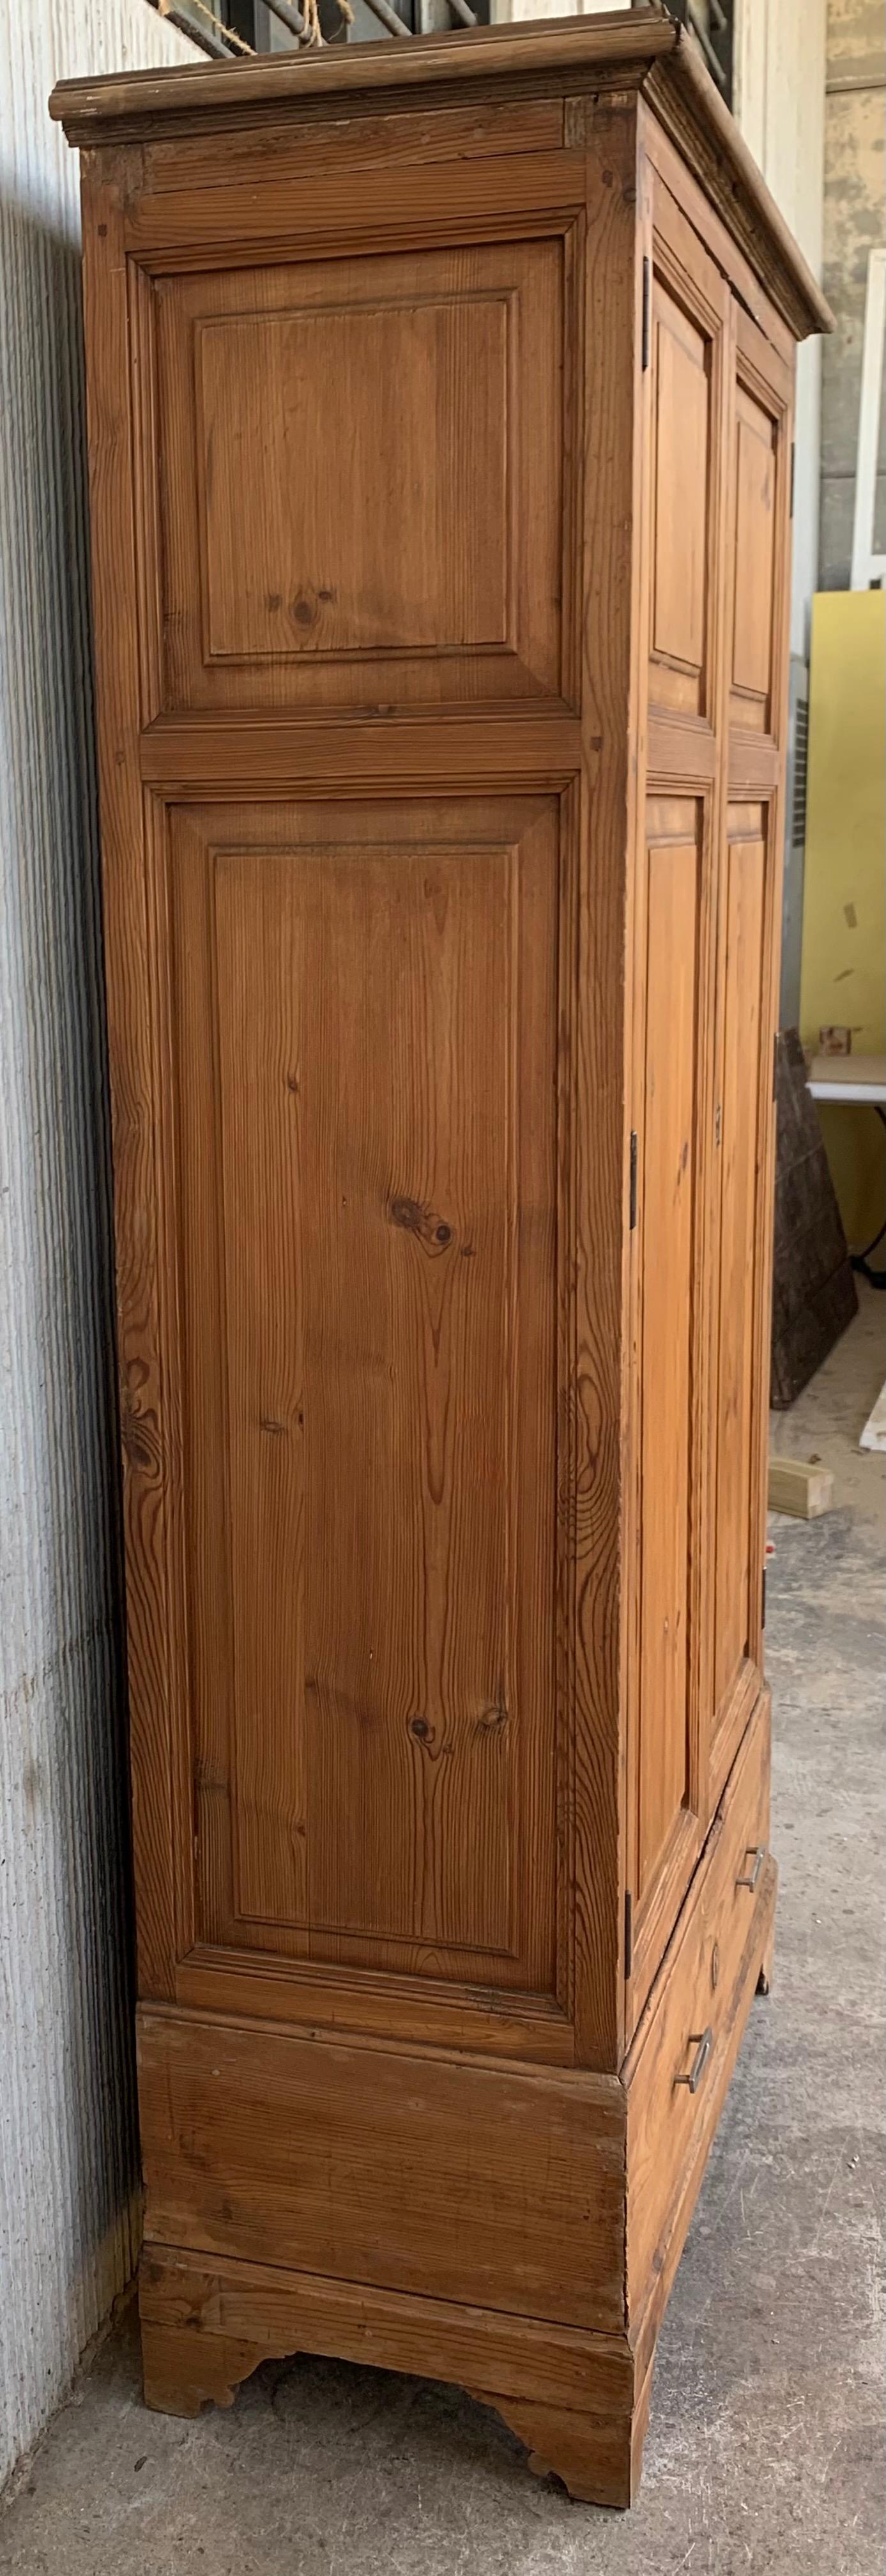 Hand-Carved 19th Century Narrow Cupboard or Cabinet, Pine, Castillian Influence, Restored For Sale